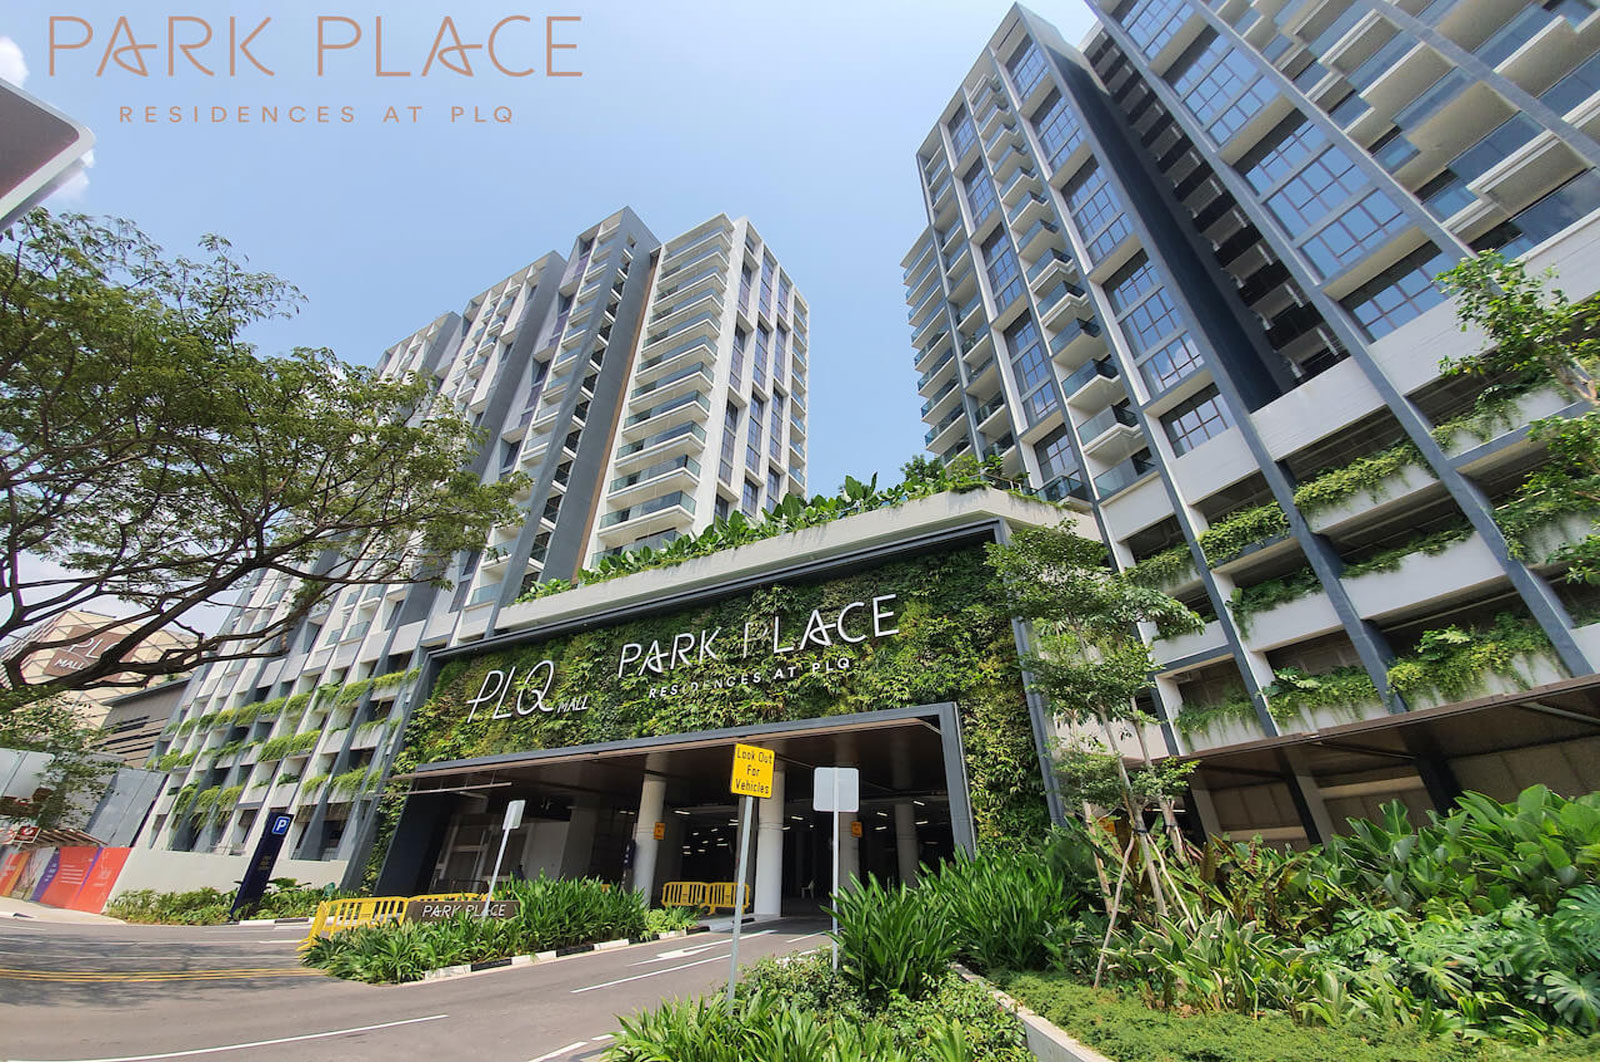 Geylang condo Singapore - Park Place Residences is within a 13-minute walk to Geylang Serai Market